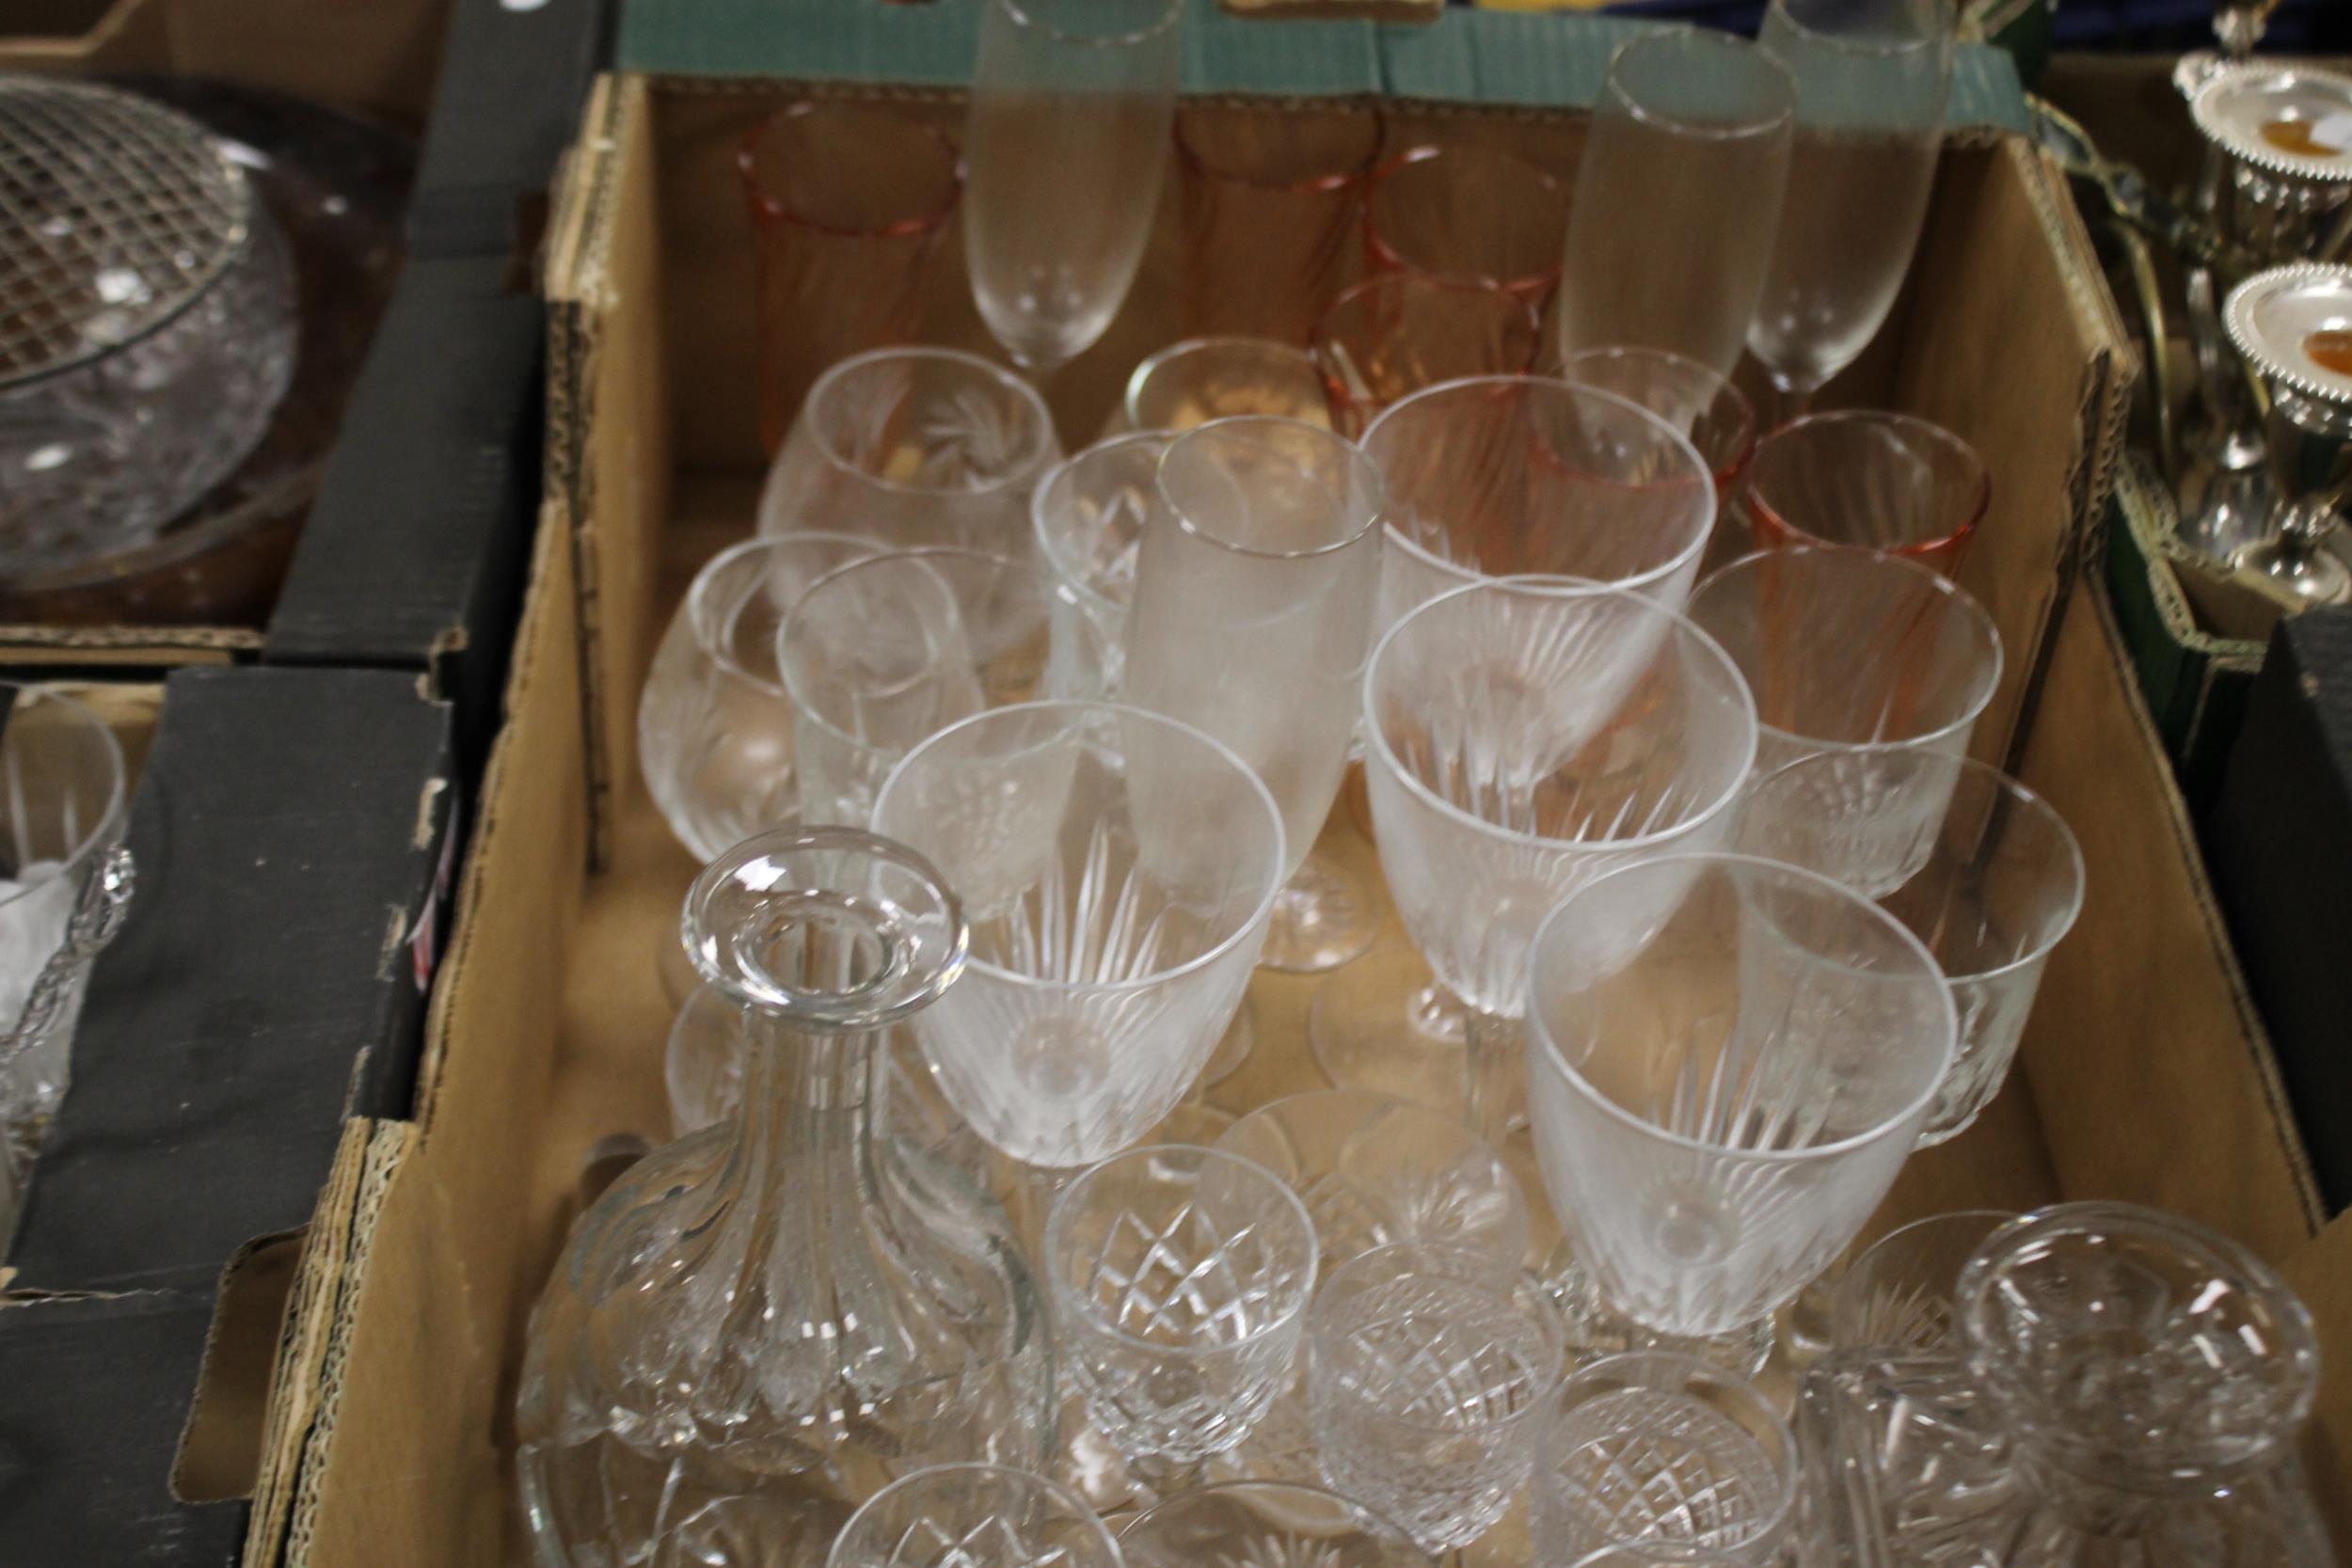 THREE TRAYS OF GLASSWARE TO INCLUDE AN EPERGNE (TRAYS NOT INCLUDED) - Image 3 of 4